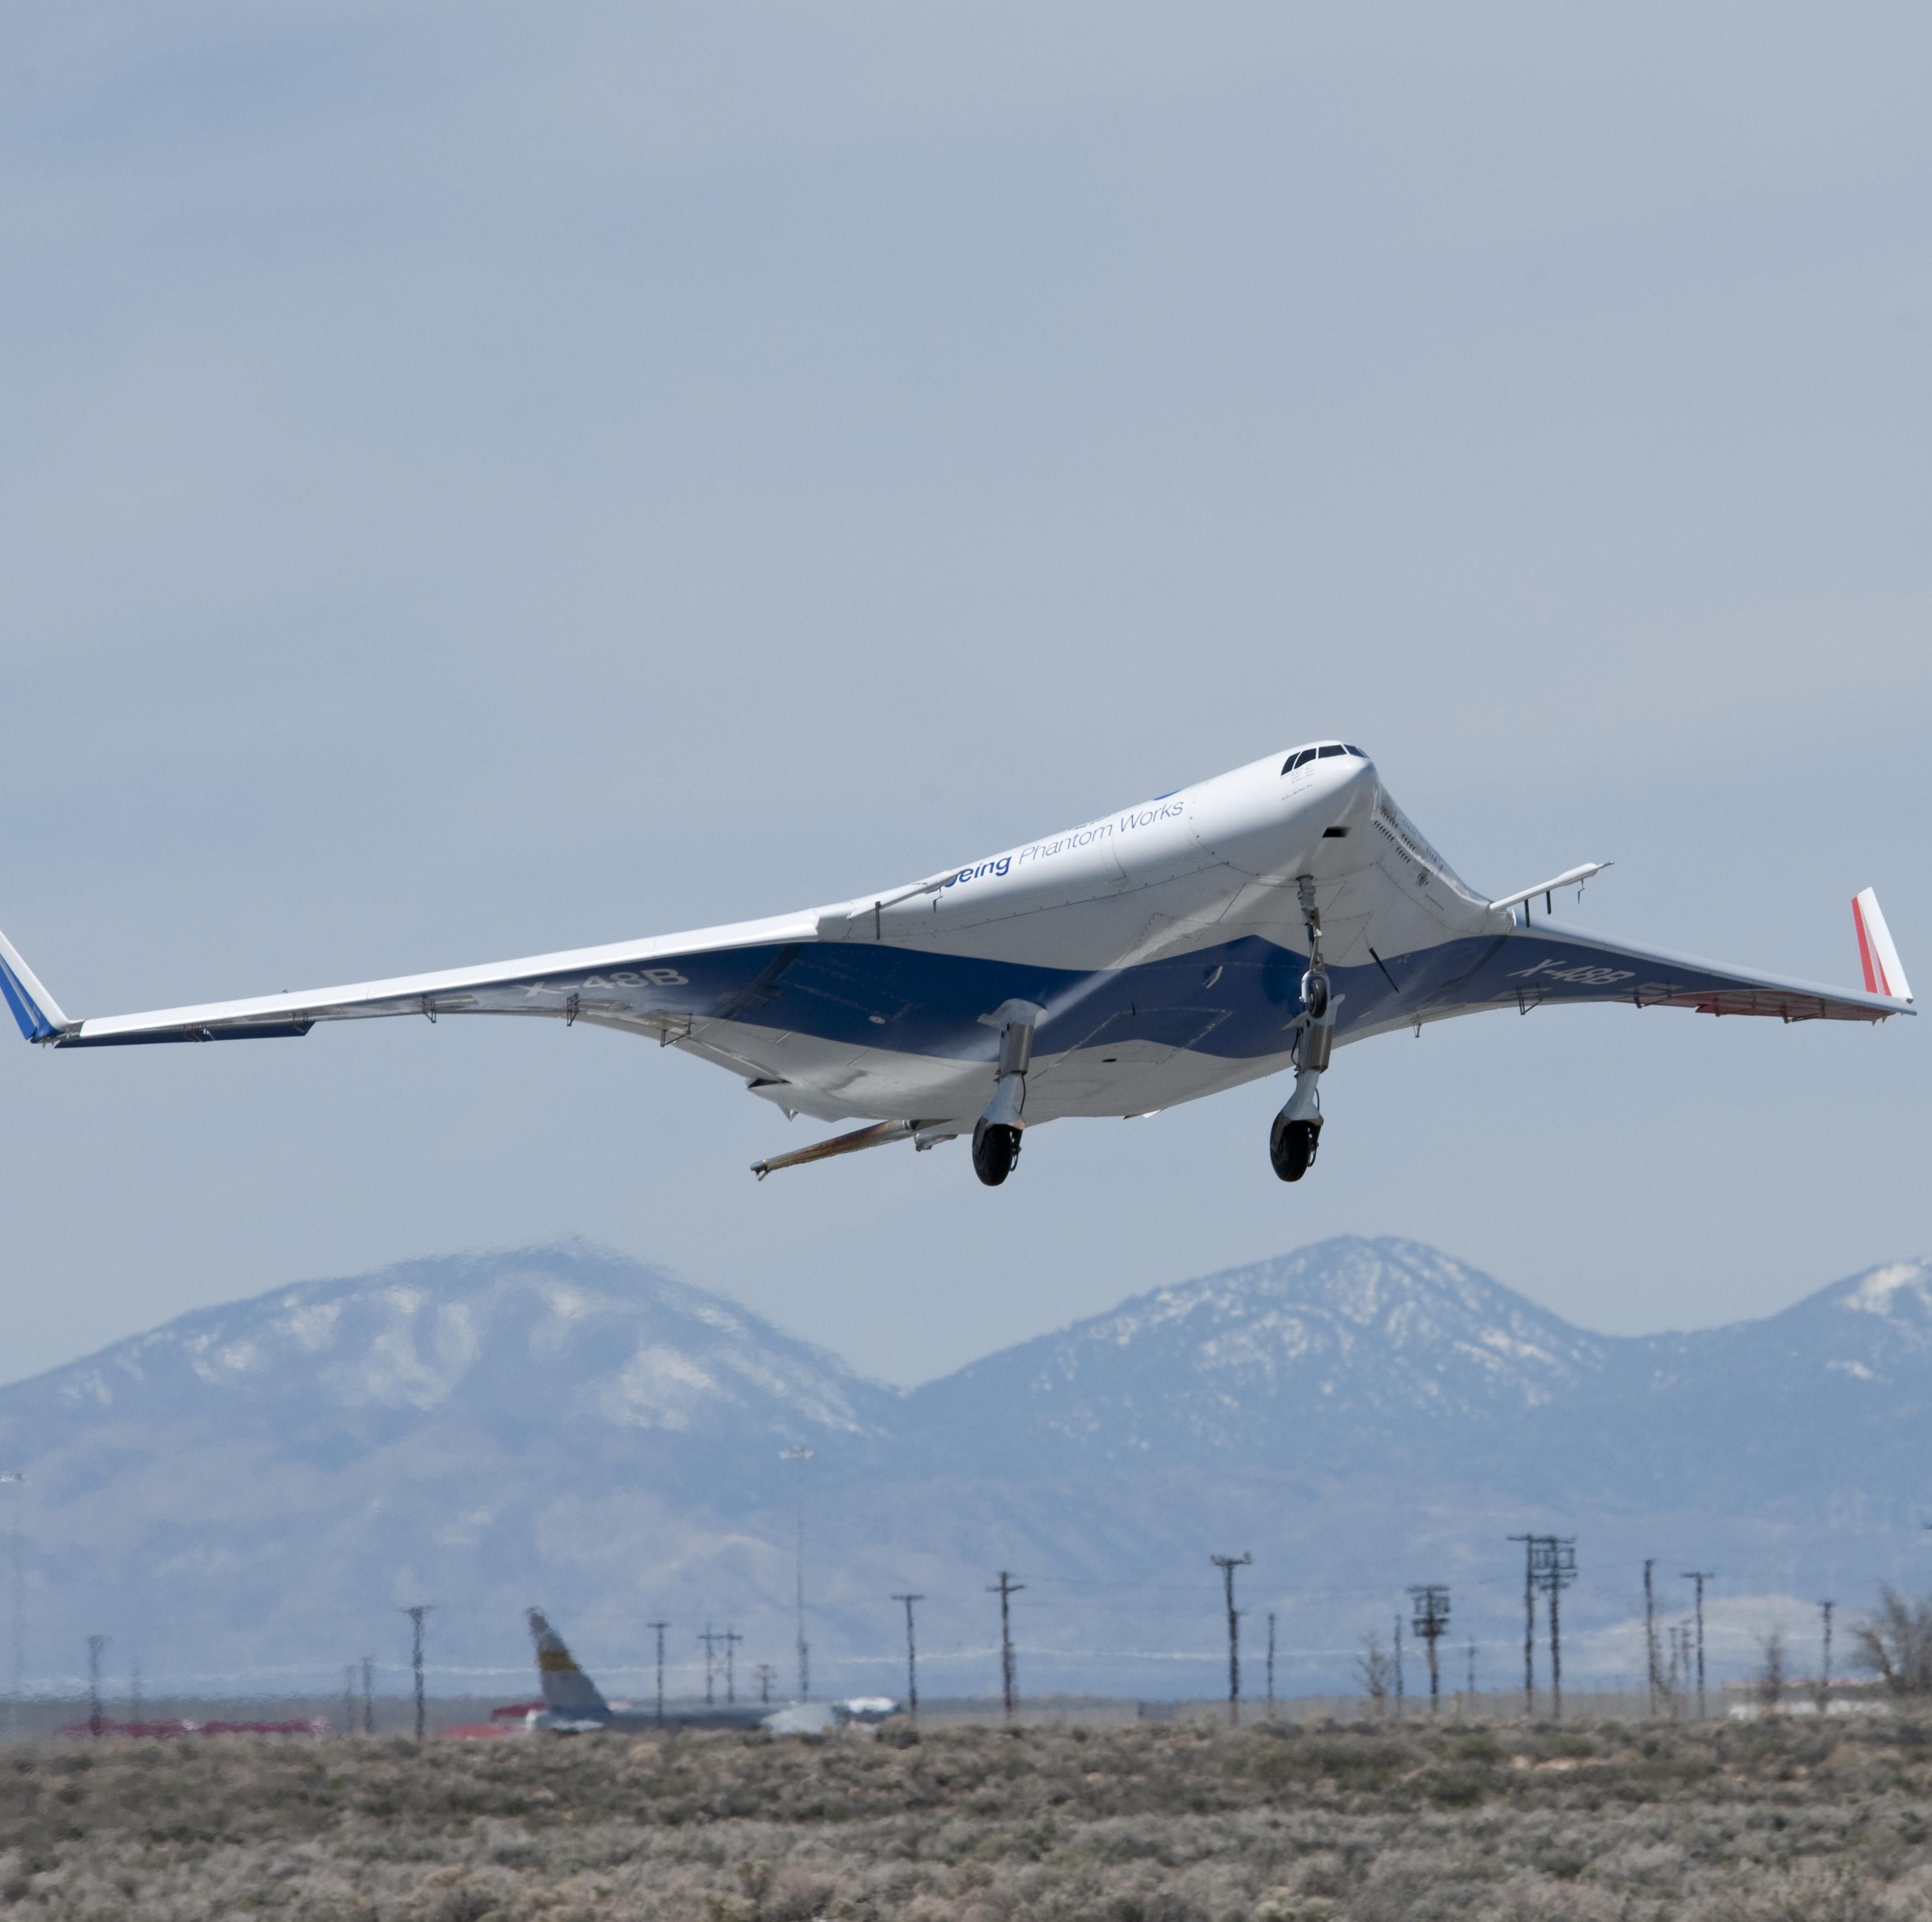 The Air Force Is Fast-Tracking a Blended Wing Body Jet to Fly in Just 4 Years